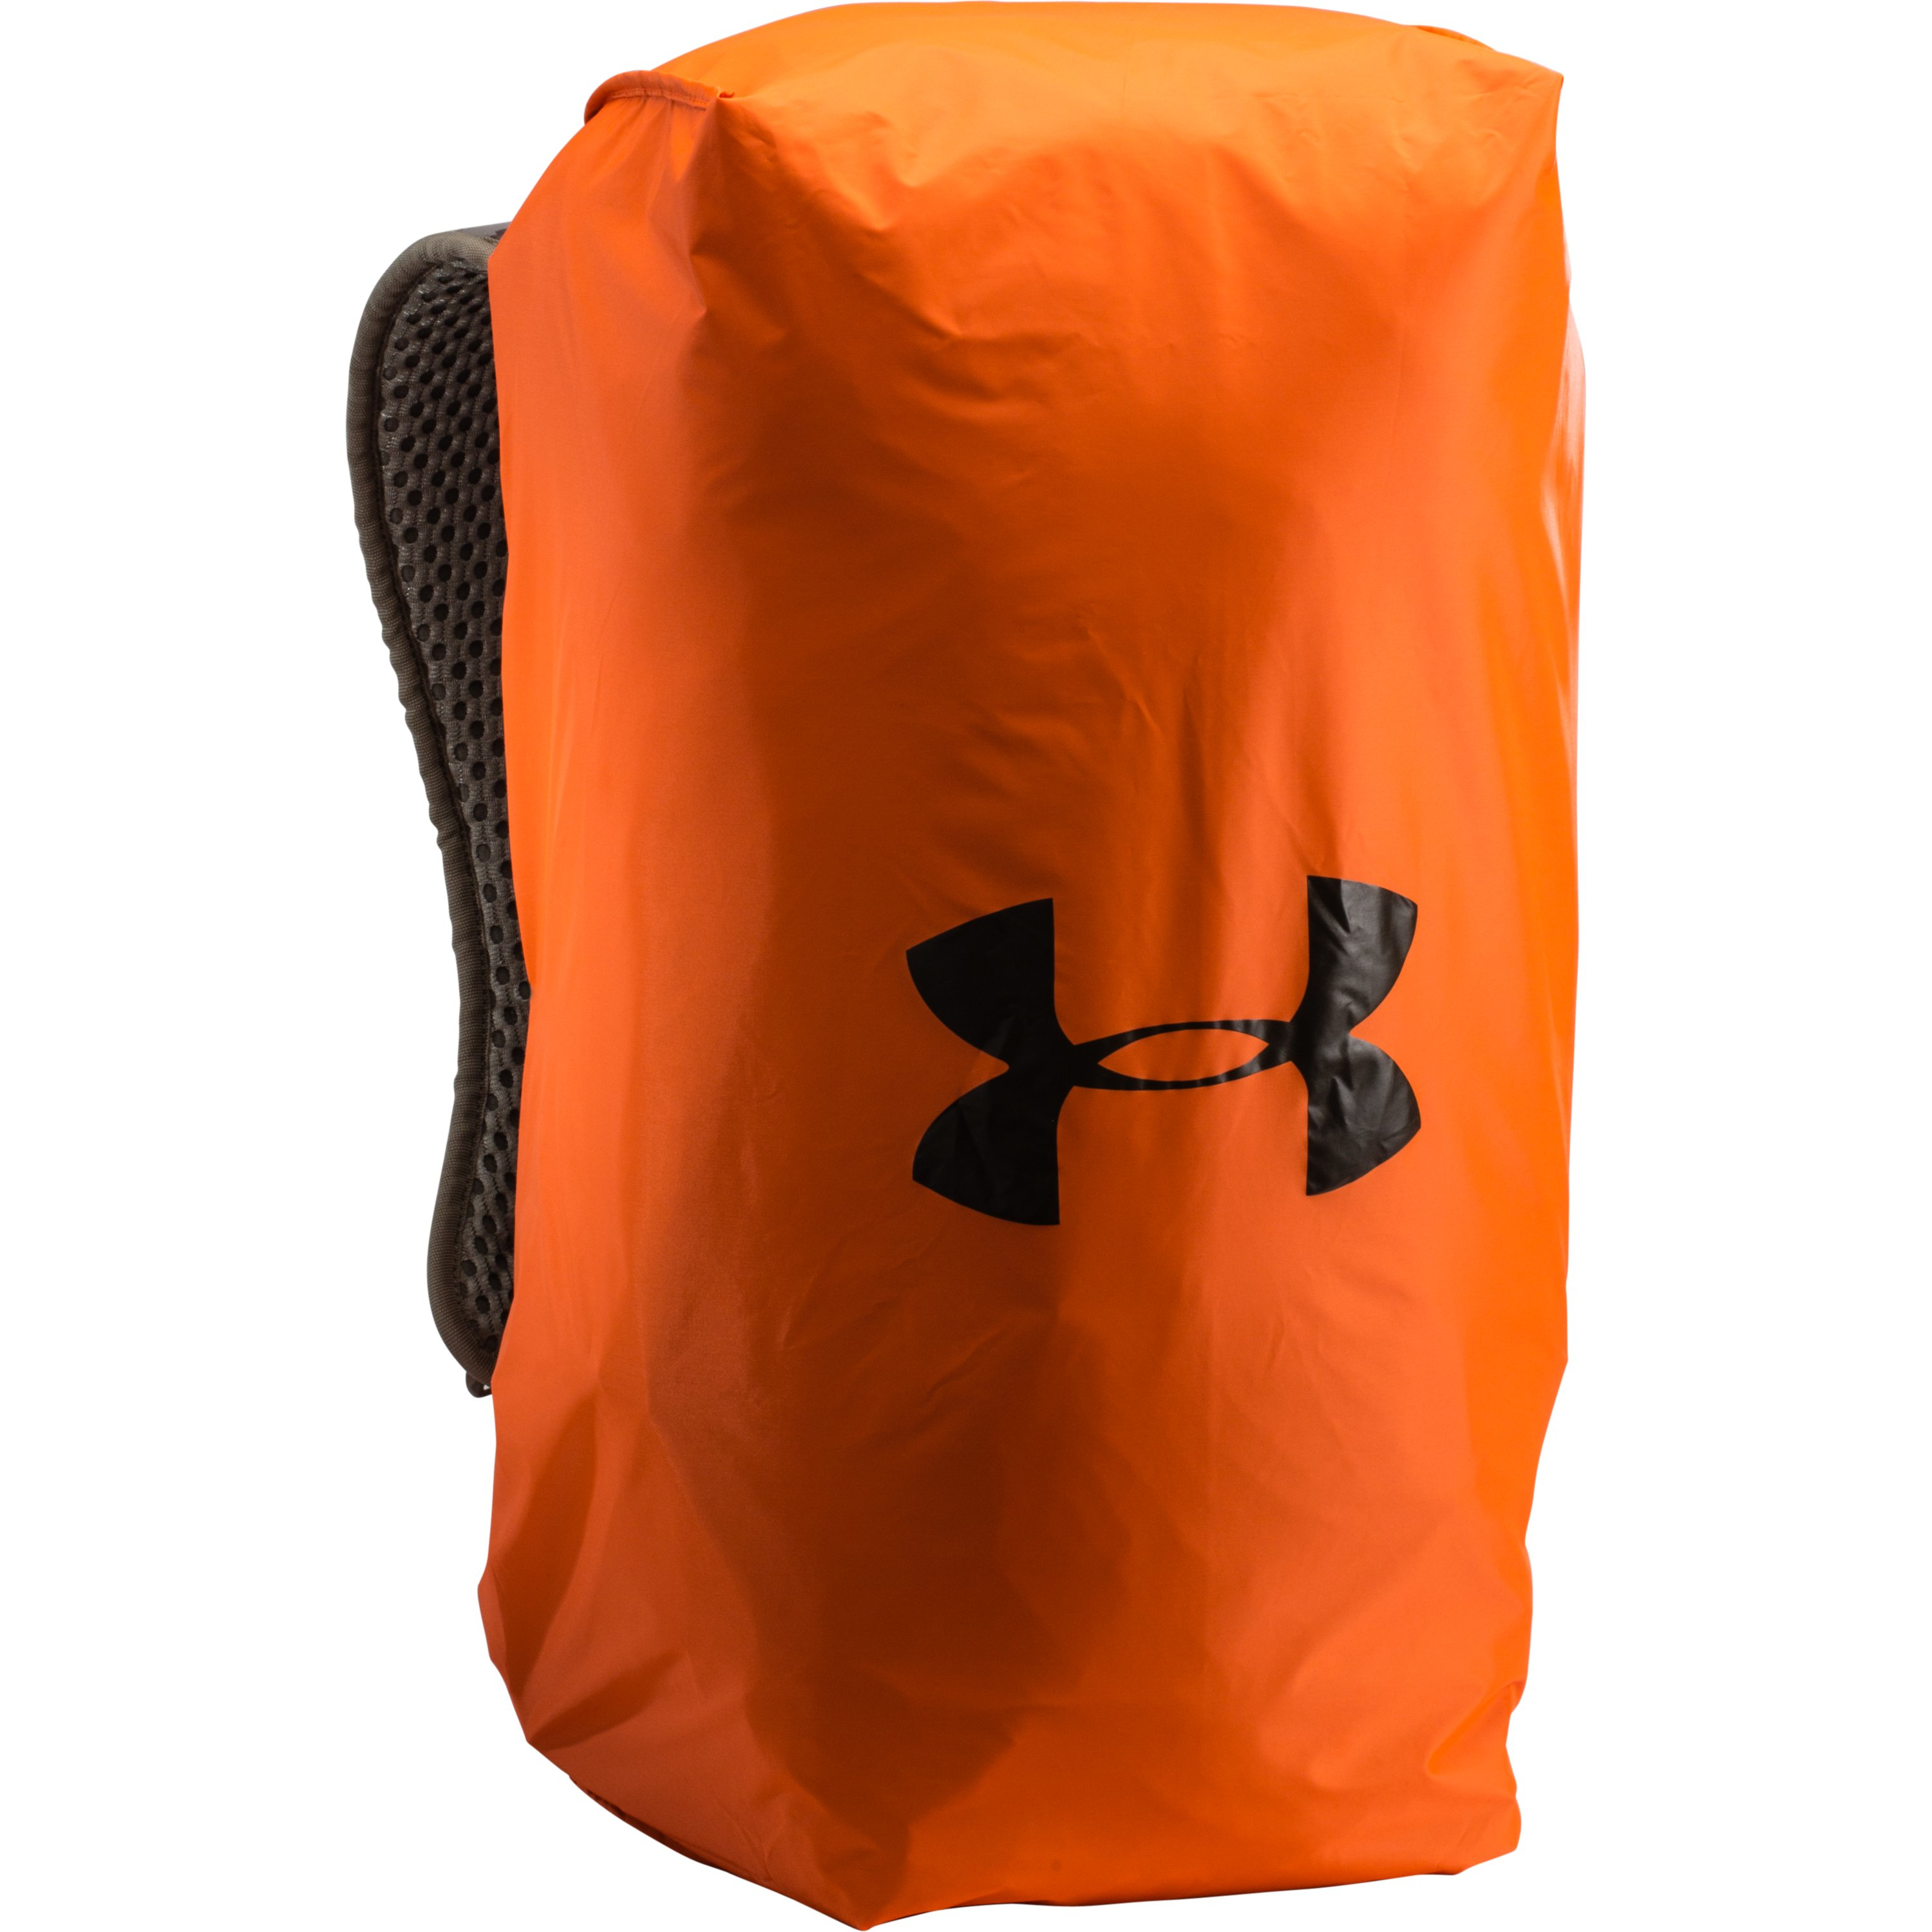 under armour 1800 camo backpack